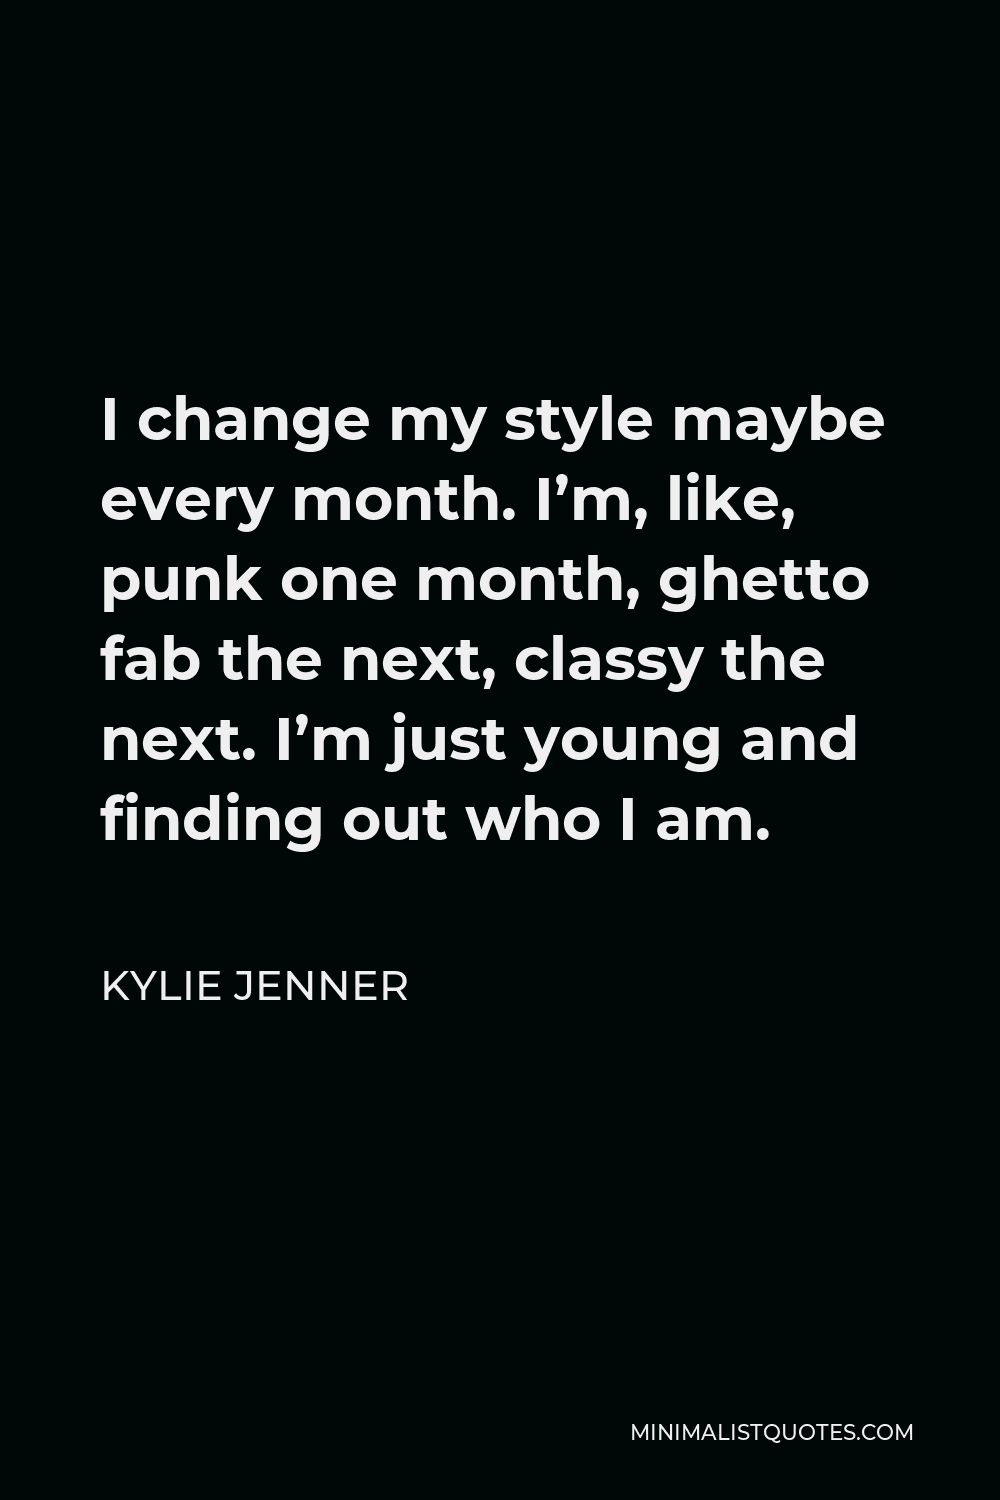 Kylie Jenner Quote - I change my style maybe every month. I’m, like, punk one month, ghetto fab the next, classy the next. I’m just young and finding out who I am.